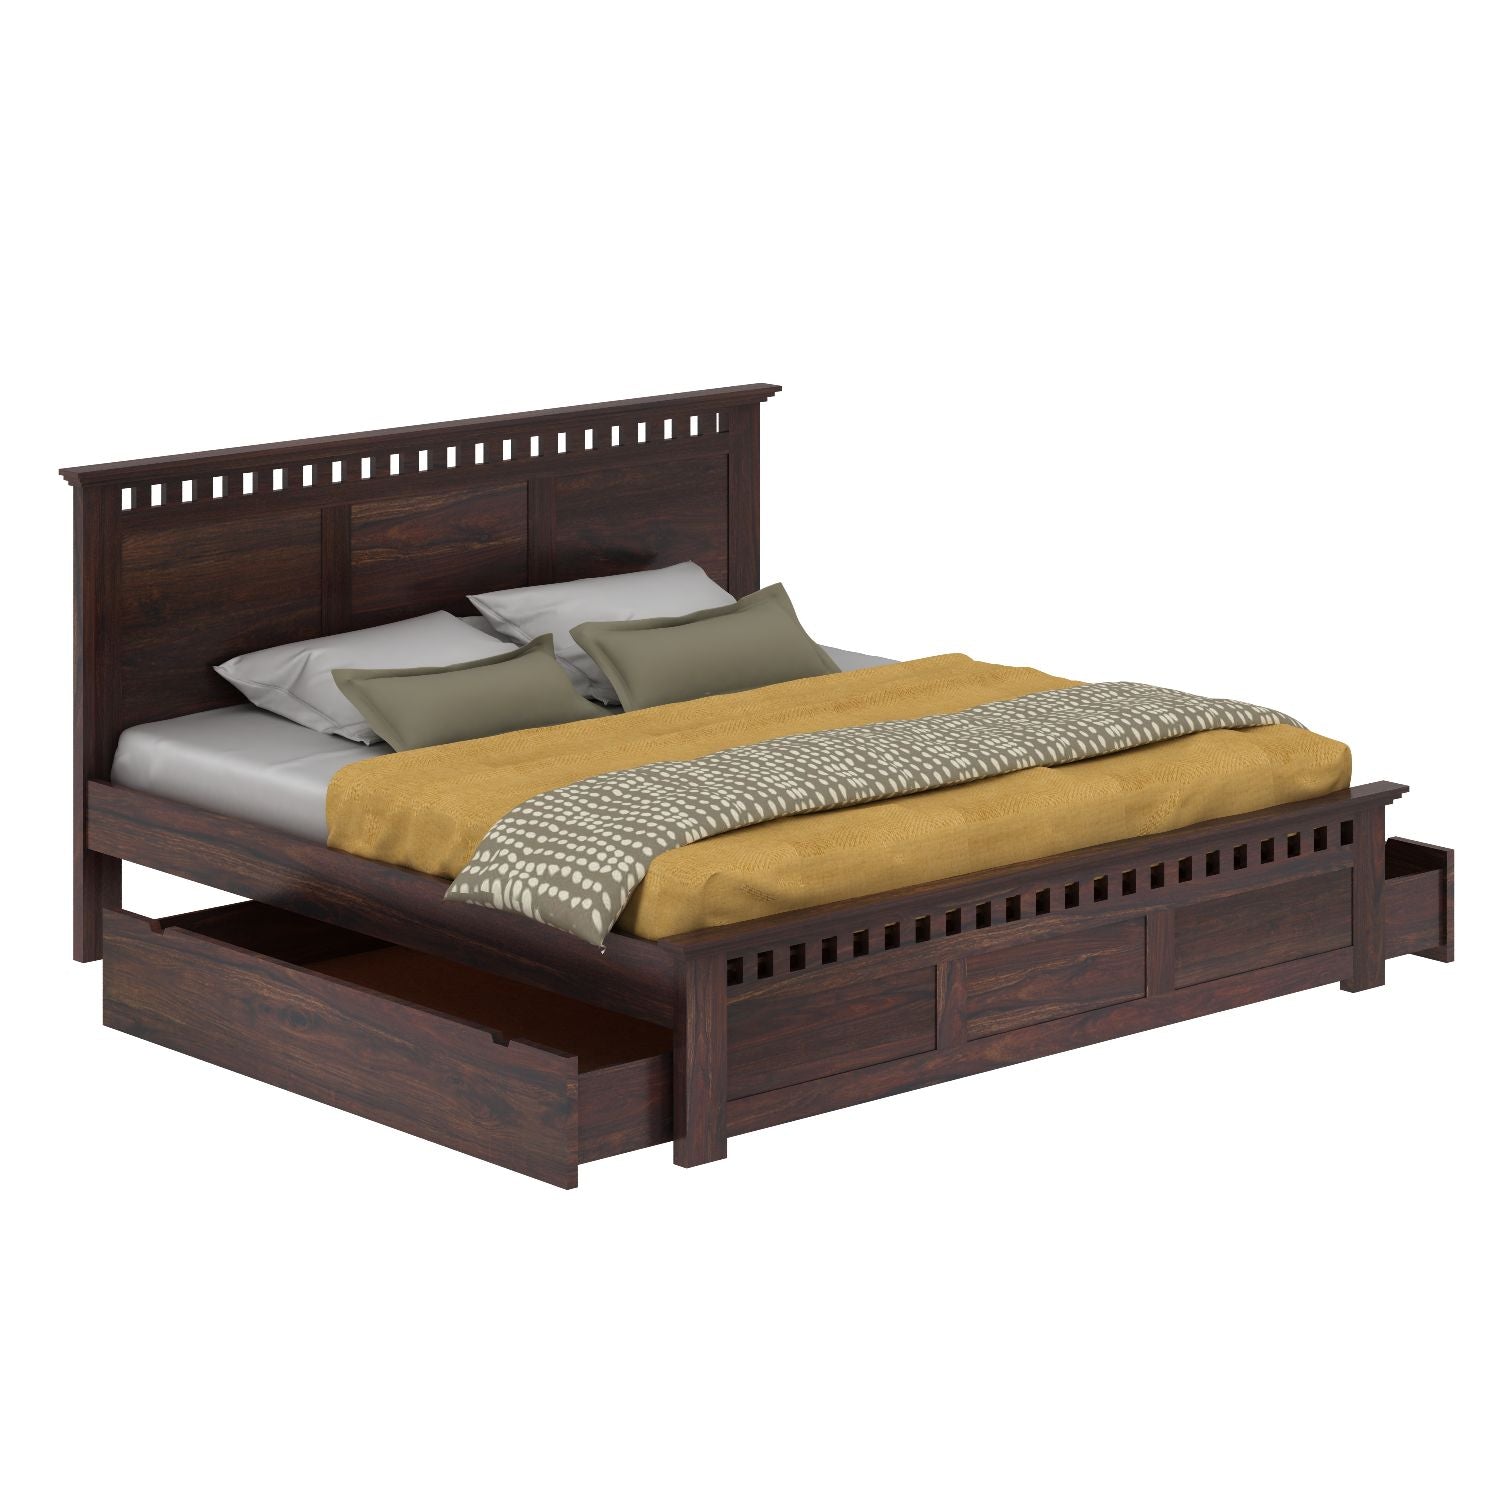 Amer Solid Sheesham Wood Bed With Two Drawers (King Size, Walnut Finish)